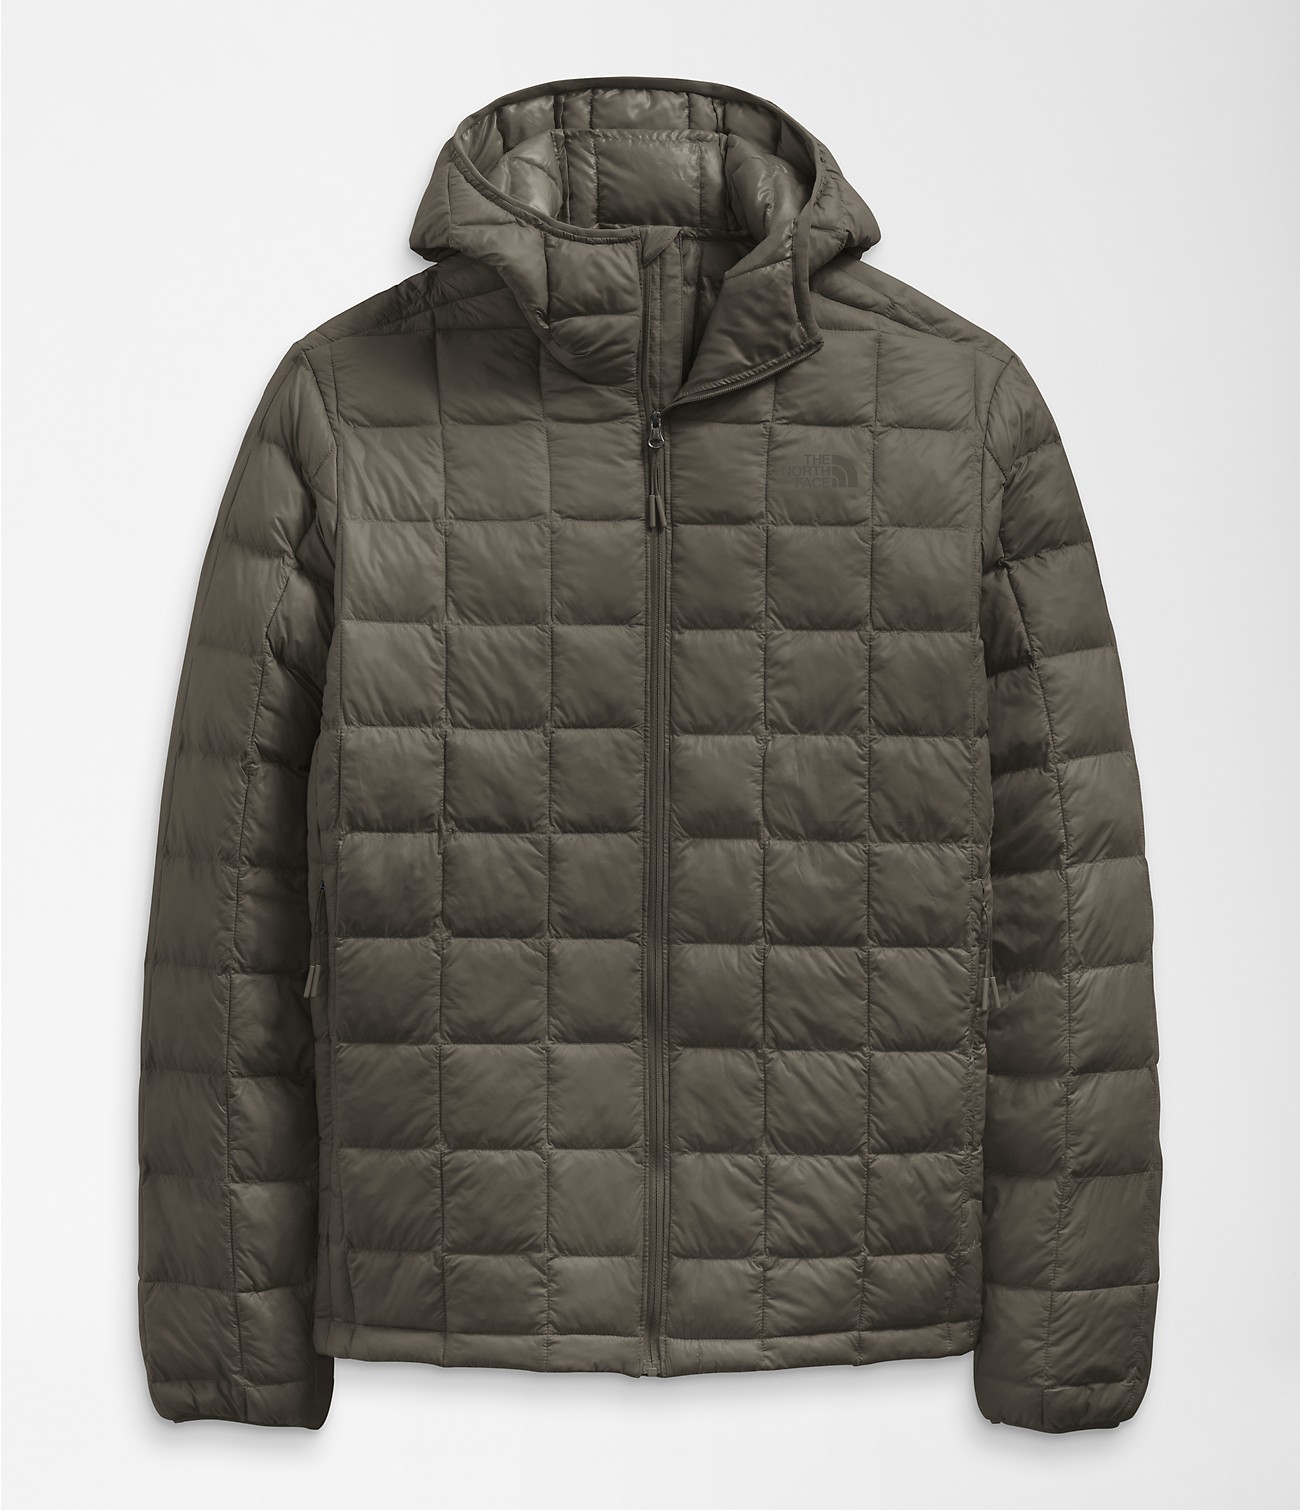 Unlock Wilderness' choice in the Stone Island Vs North Face comparison, the ThermoBall™ Eco Jacket 2.0 by The North Face